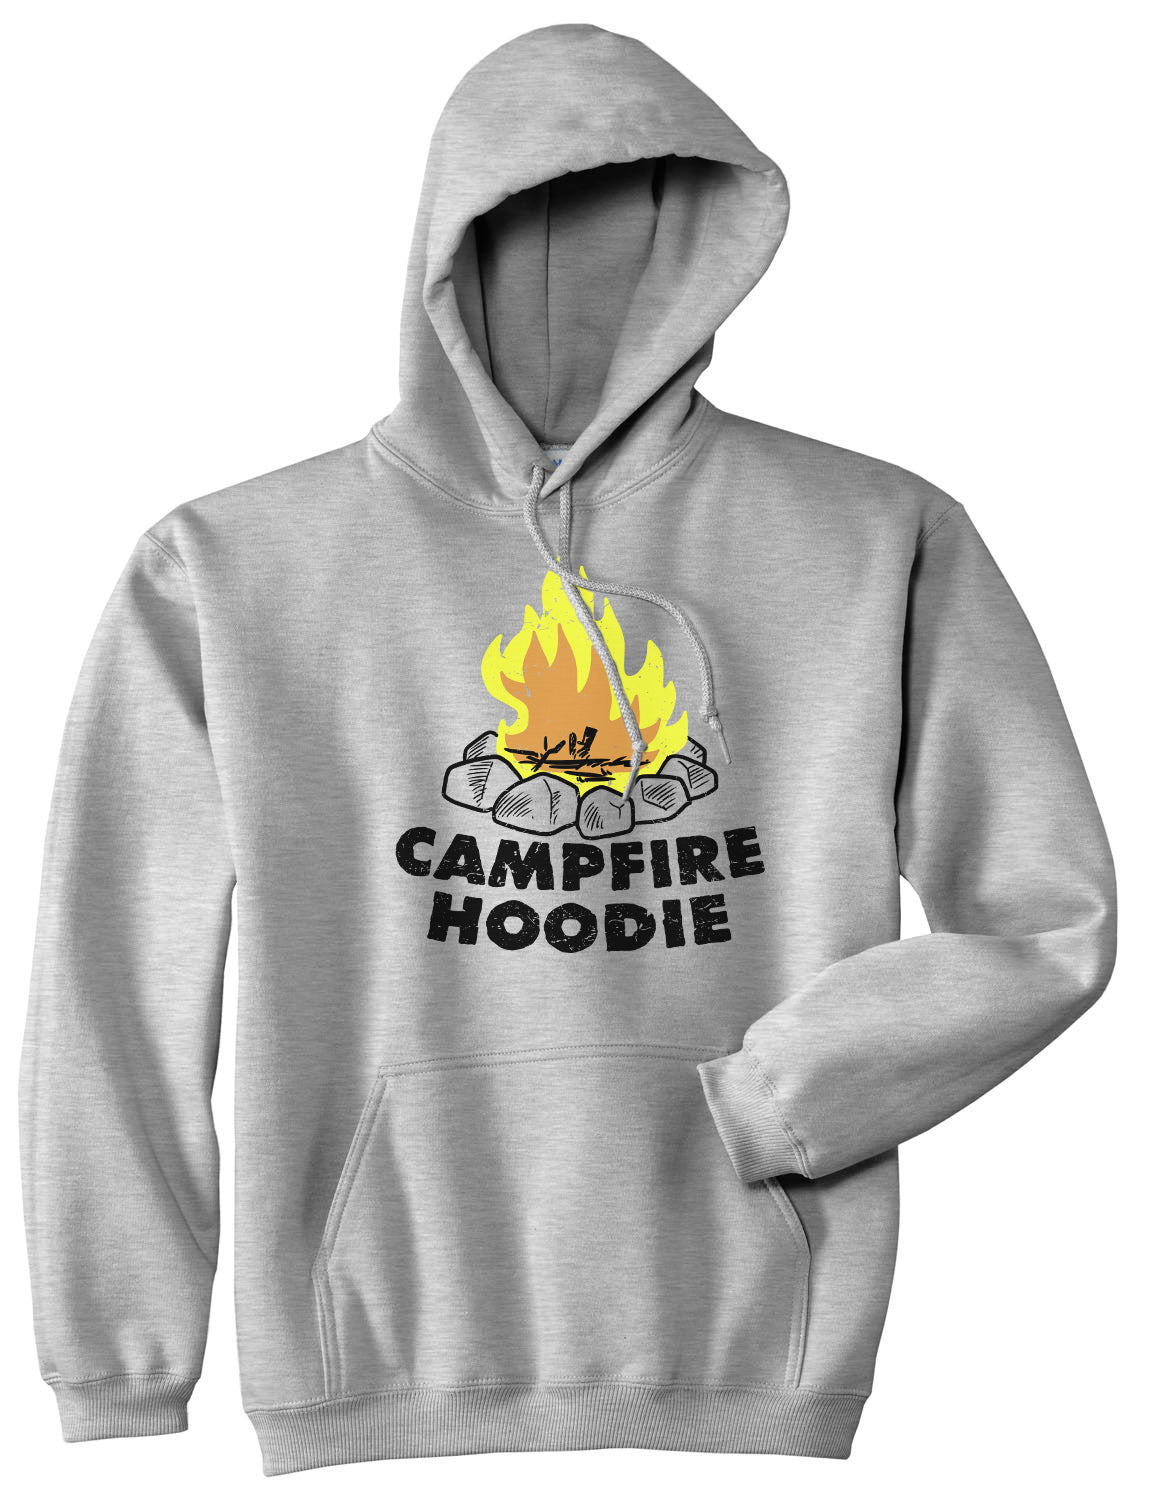 Funny Light Heather Grey Campfire Hoodie Nerdy Camping Tee